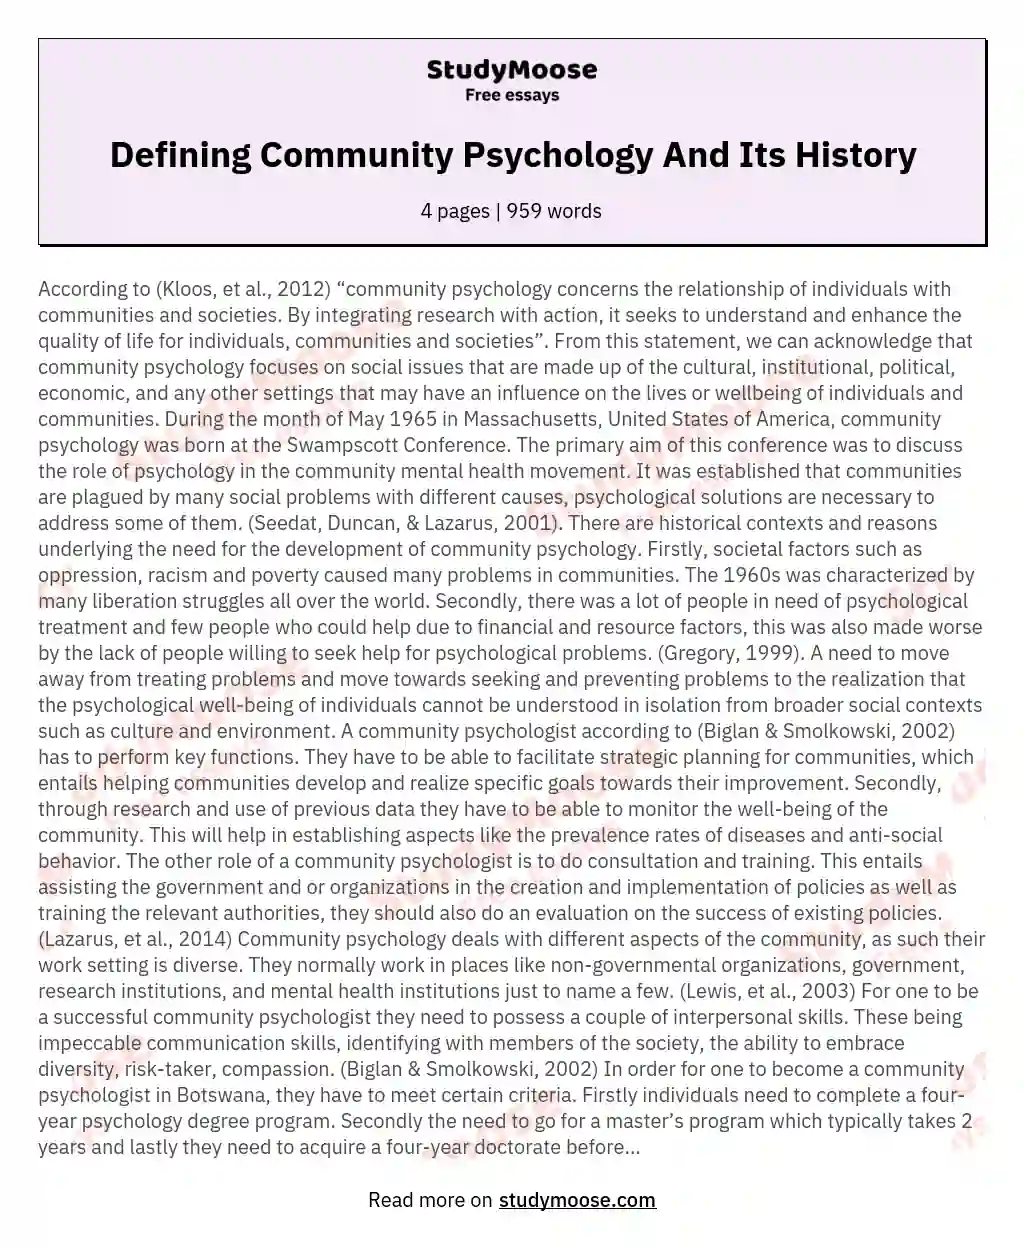 Defining Community Psychology And Its History essay